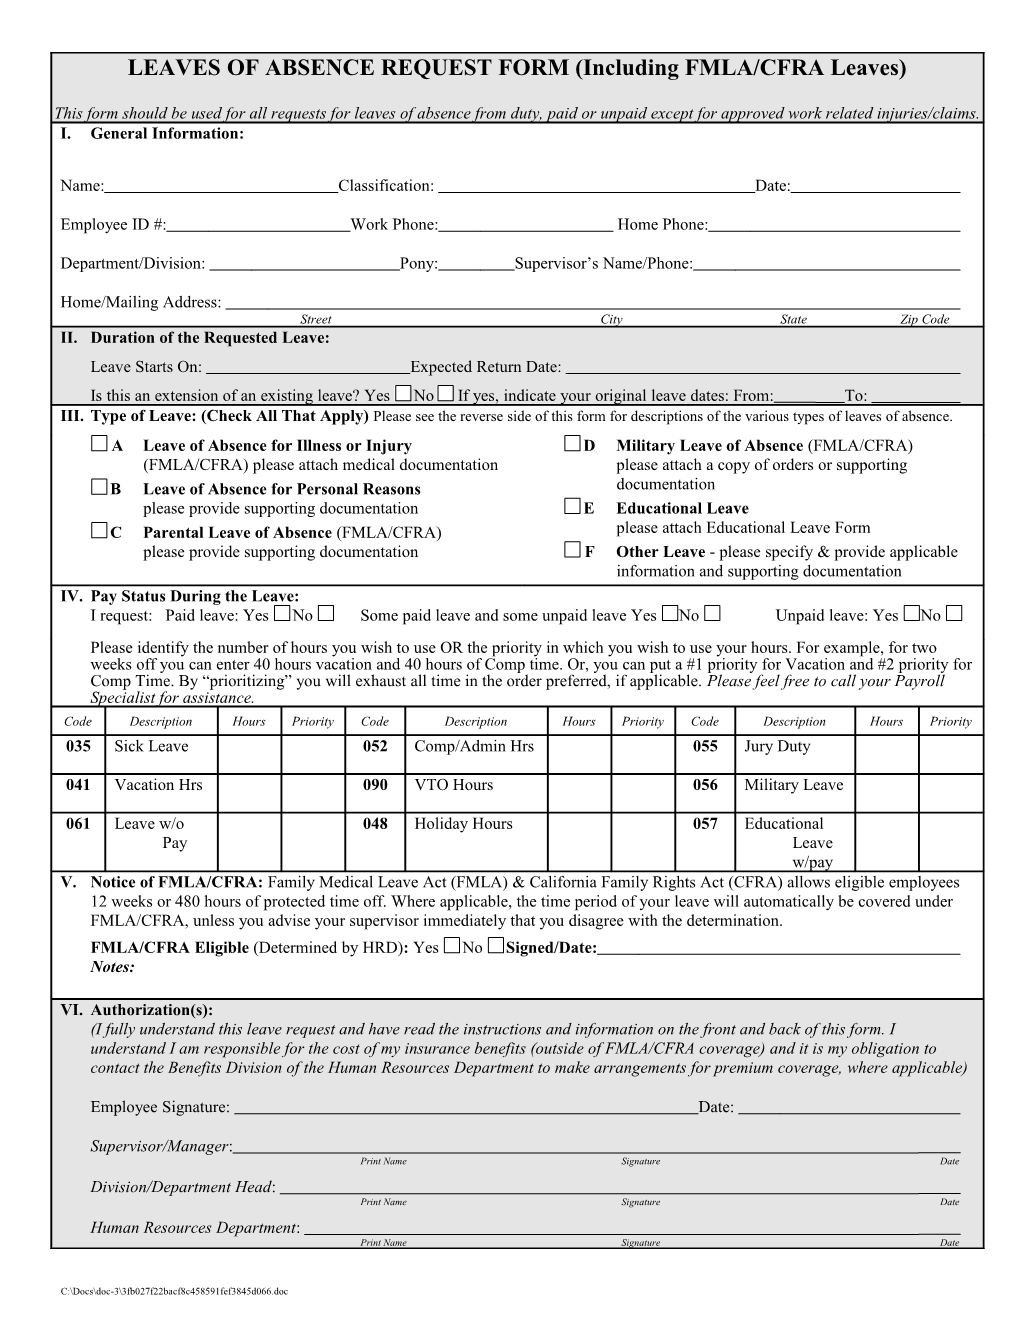 Instructions for Use of the Leave of Absence Request Form